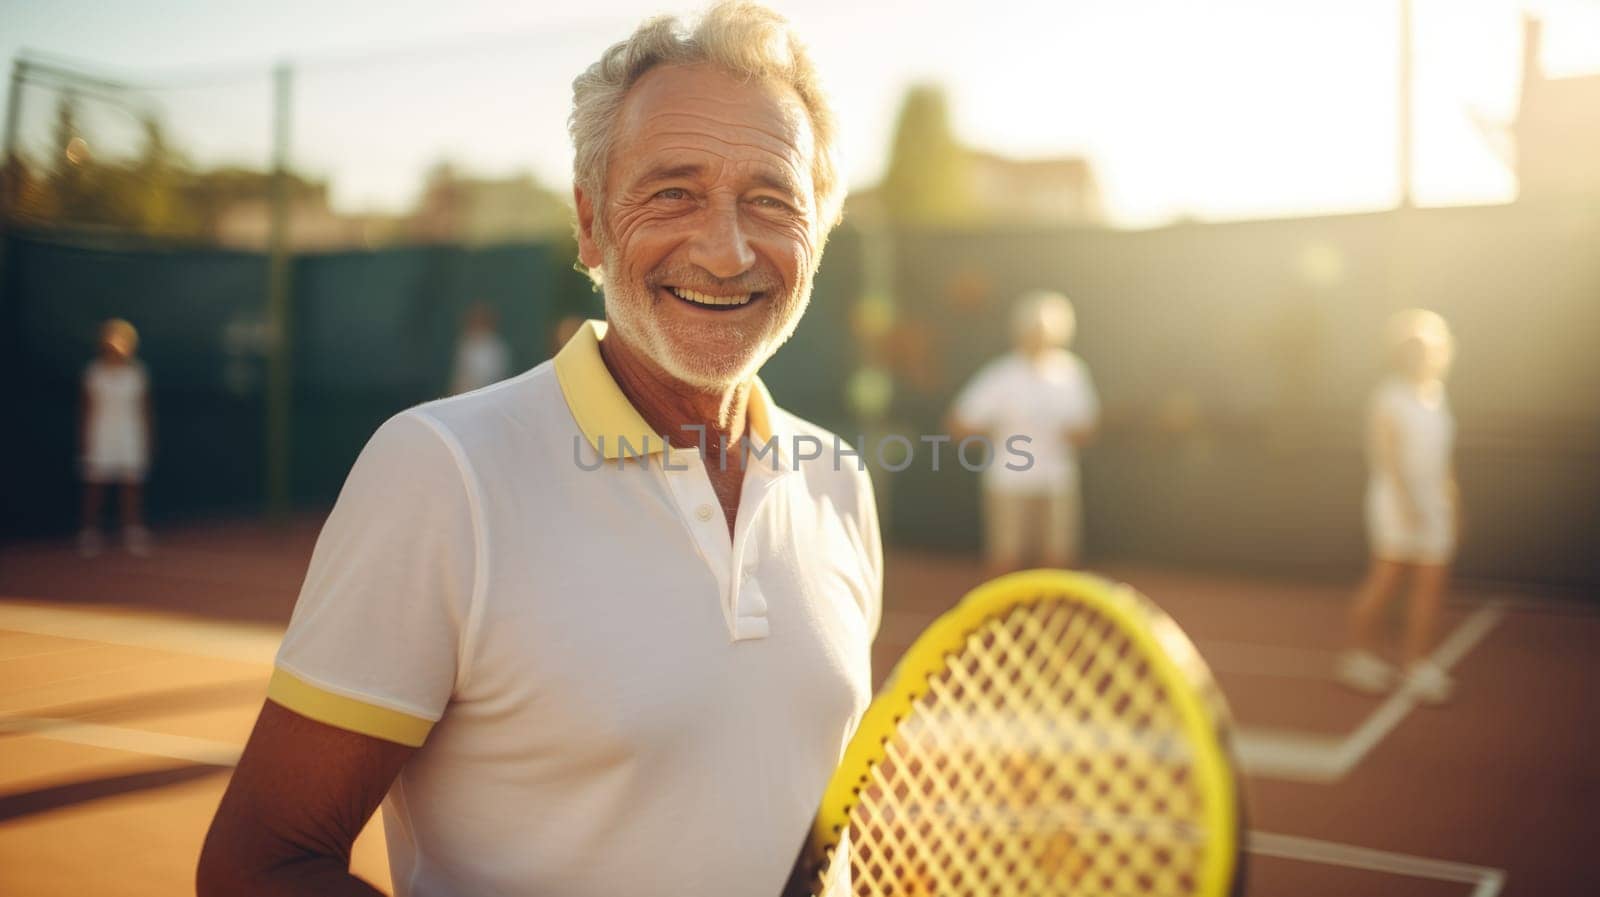 An elderly man with a content smile energetically plays tennis under the warm sun, gripping his racket. In the background, two friends have a friendly match on a sunny day at the tennis court.